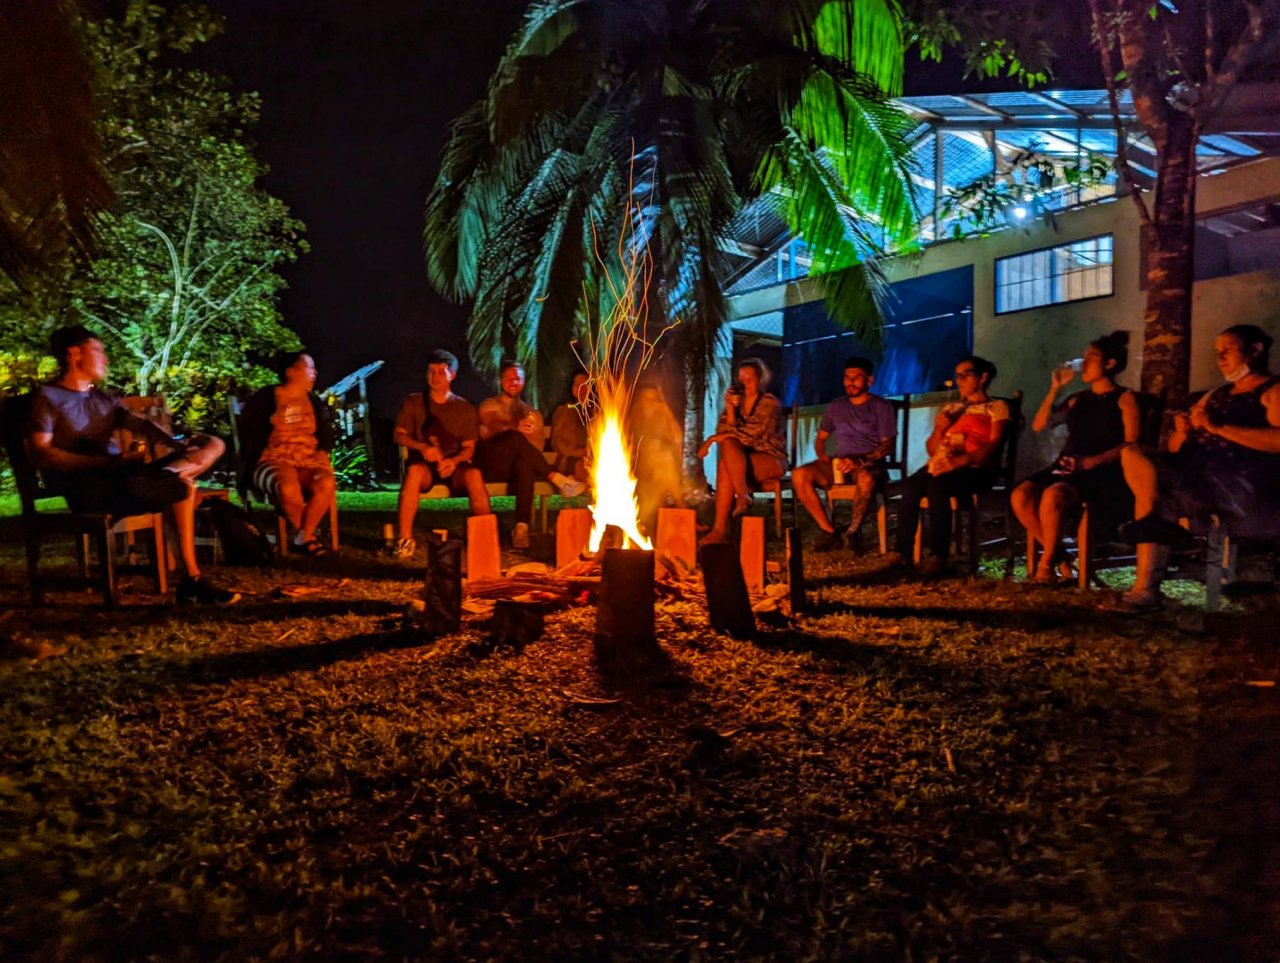 A group of people sat around a campfire at night.